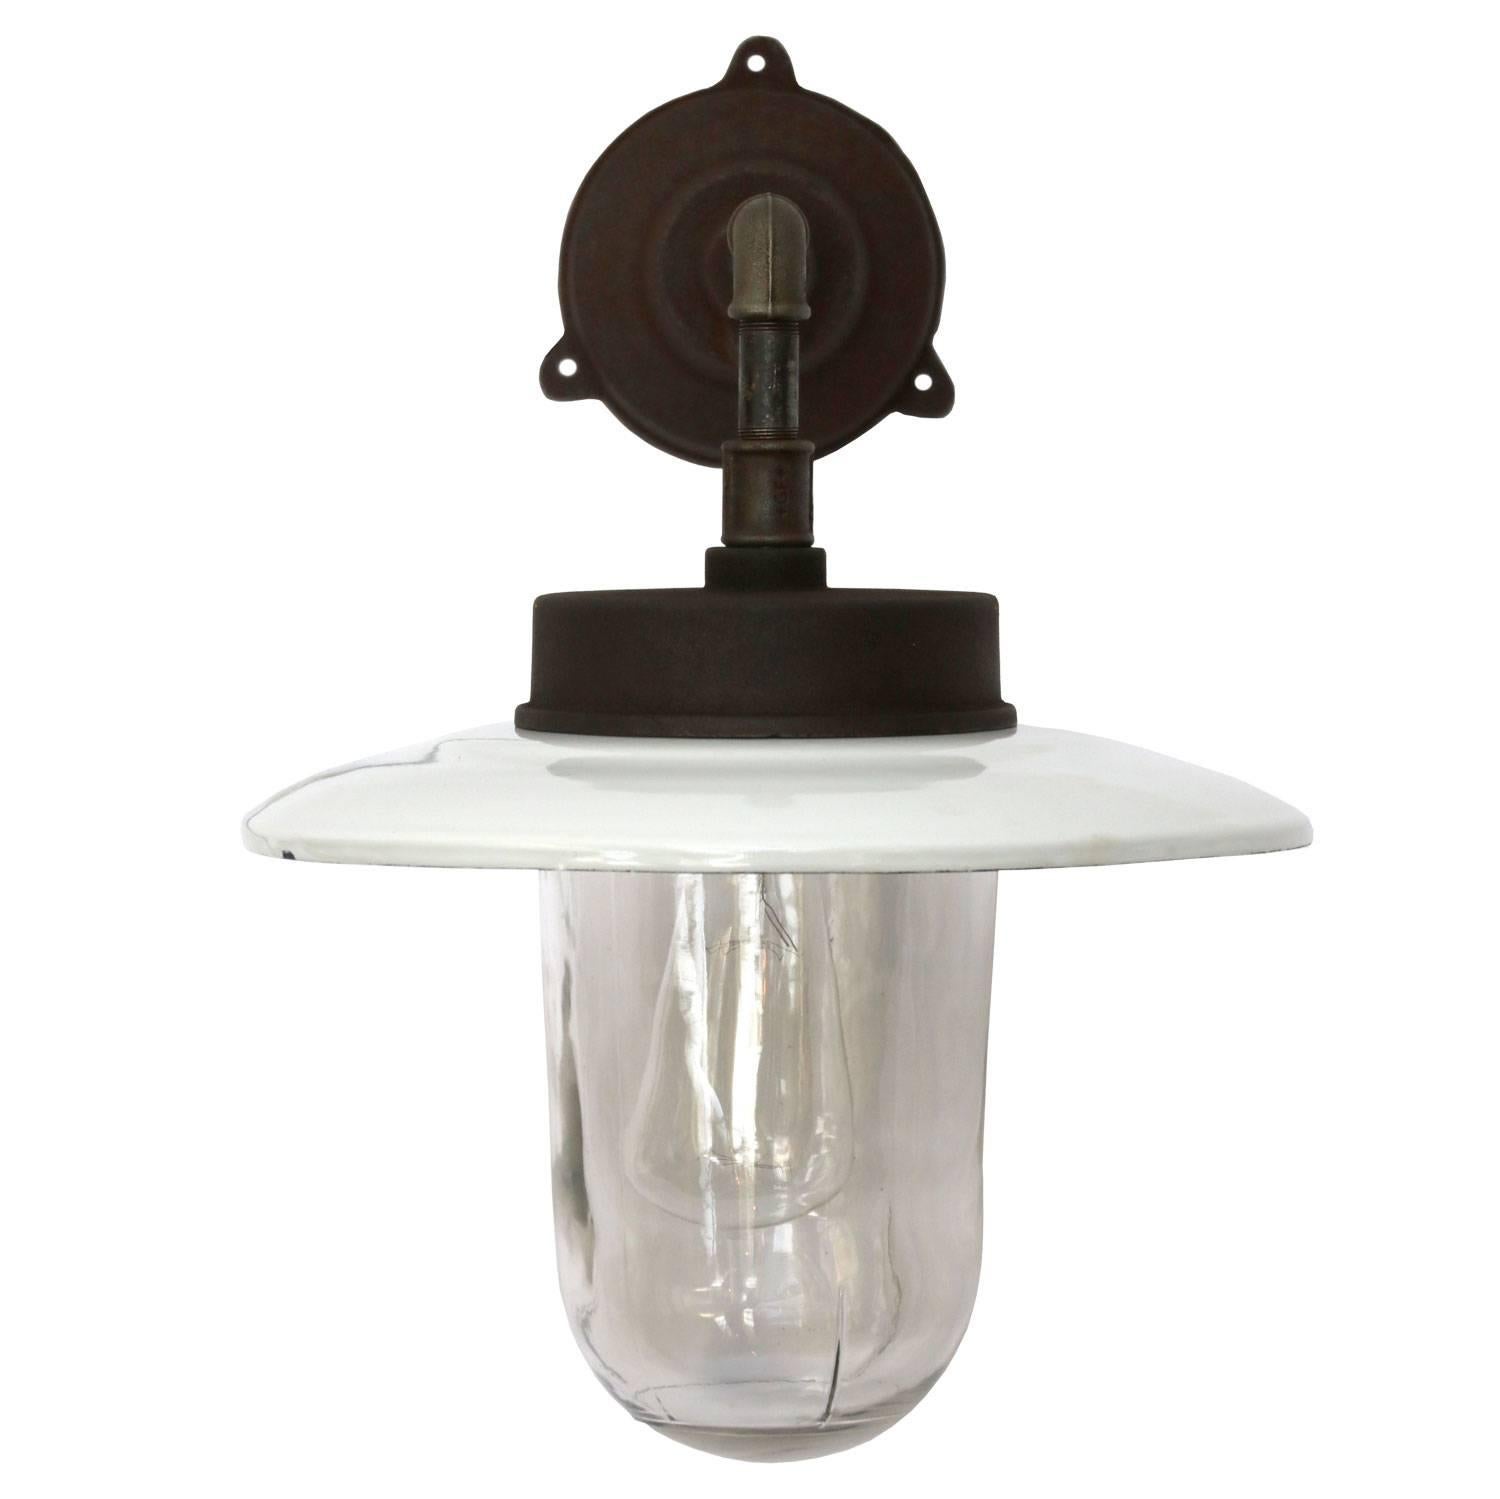 White enamel Industrial wall light. Clear glass. Measures: Diameter cast iron wall piece: 12 cm. Three holes to secure.

Weight: 6.5 kg / 14.3 lb

All lamps have been made suitable by international standards for incandescent light bulbs,